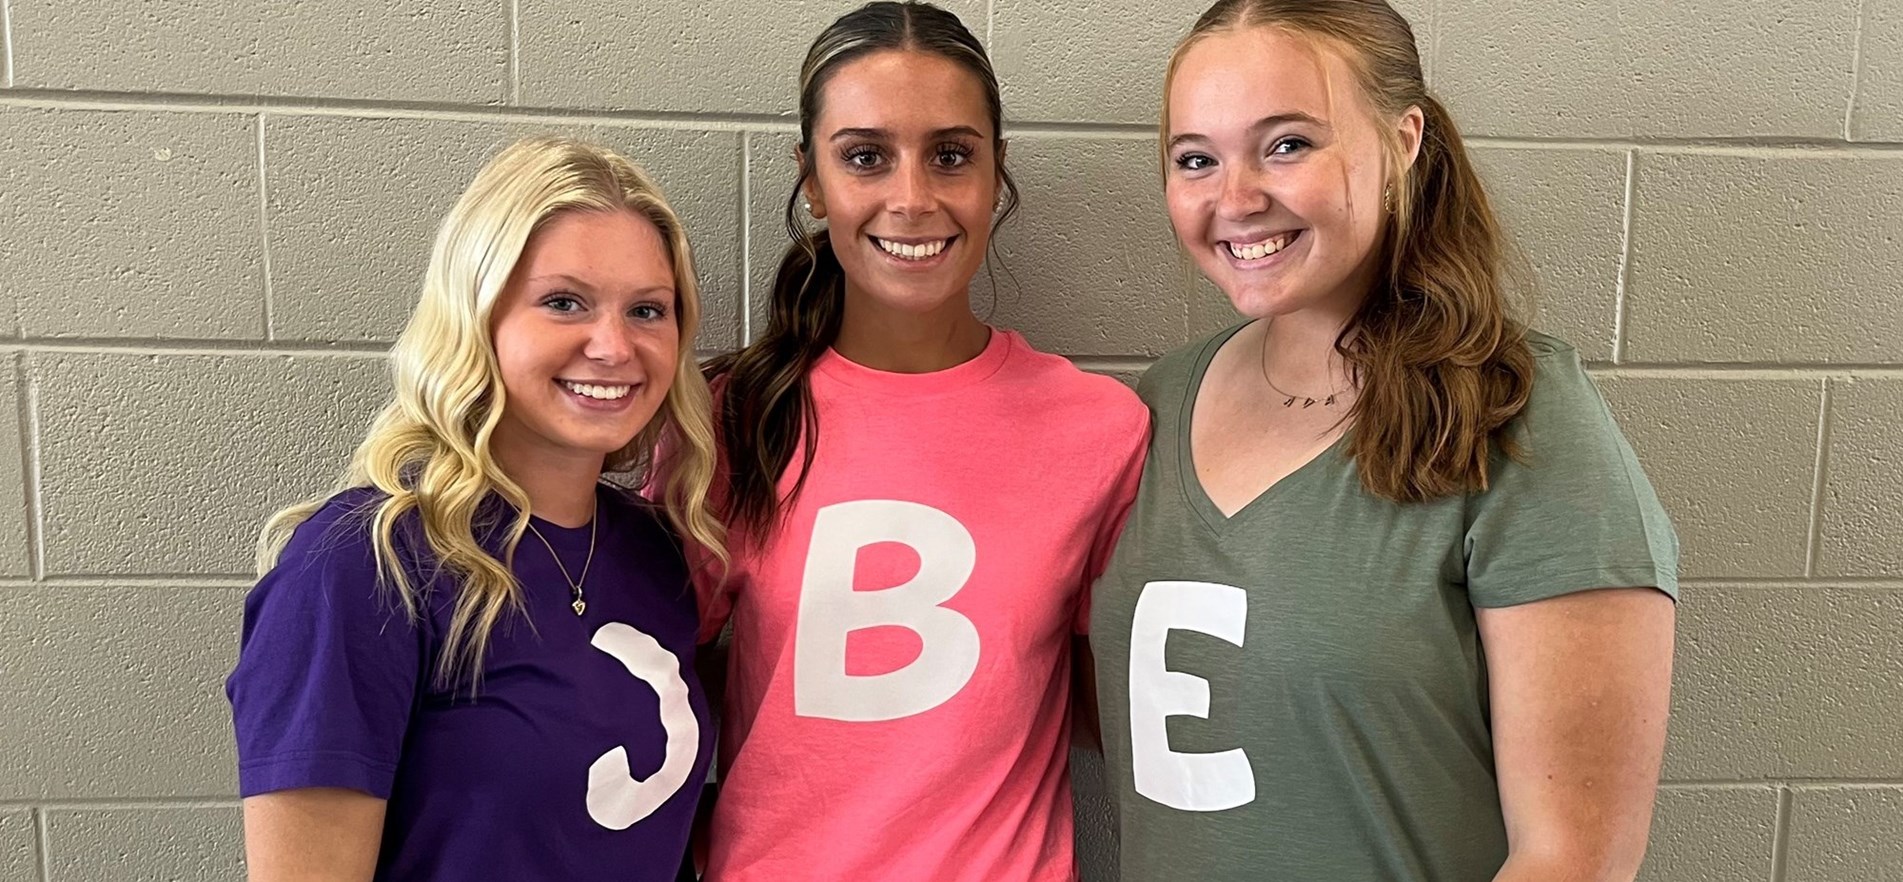 Three students wear matching themed T-shirts and skirts for special Iconic Duo themed dress day